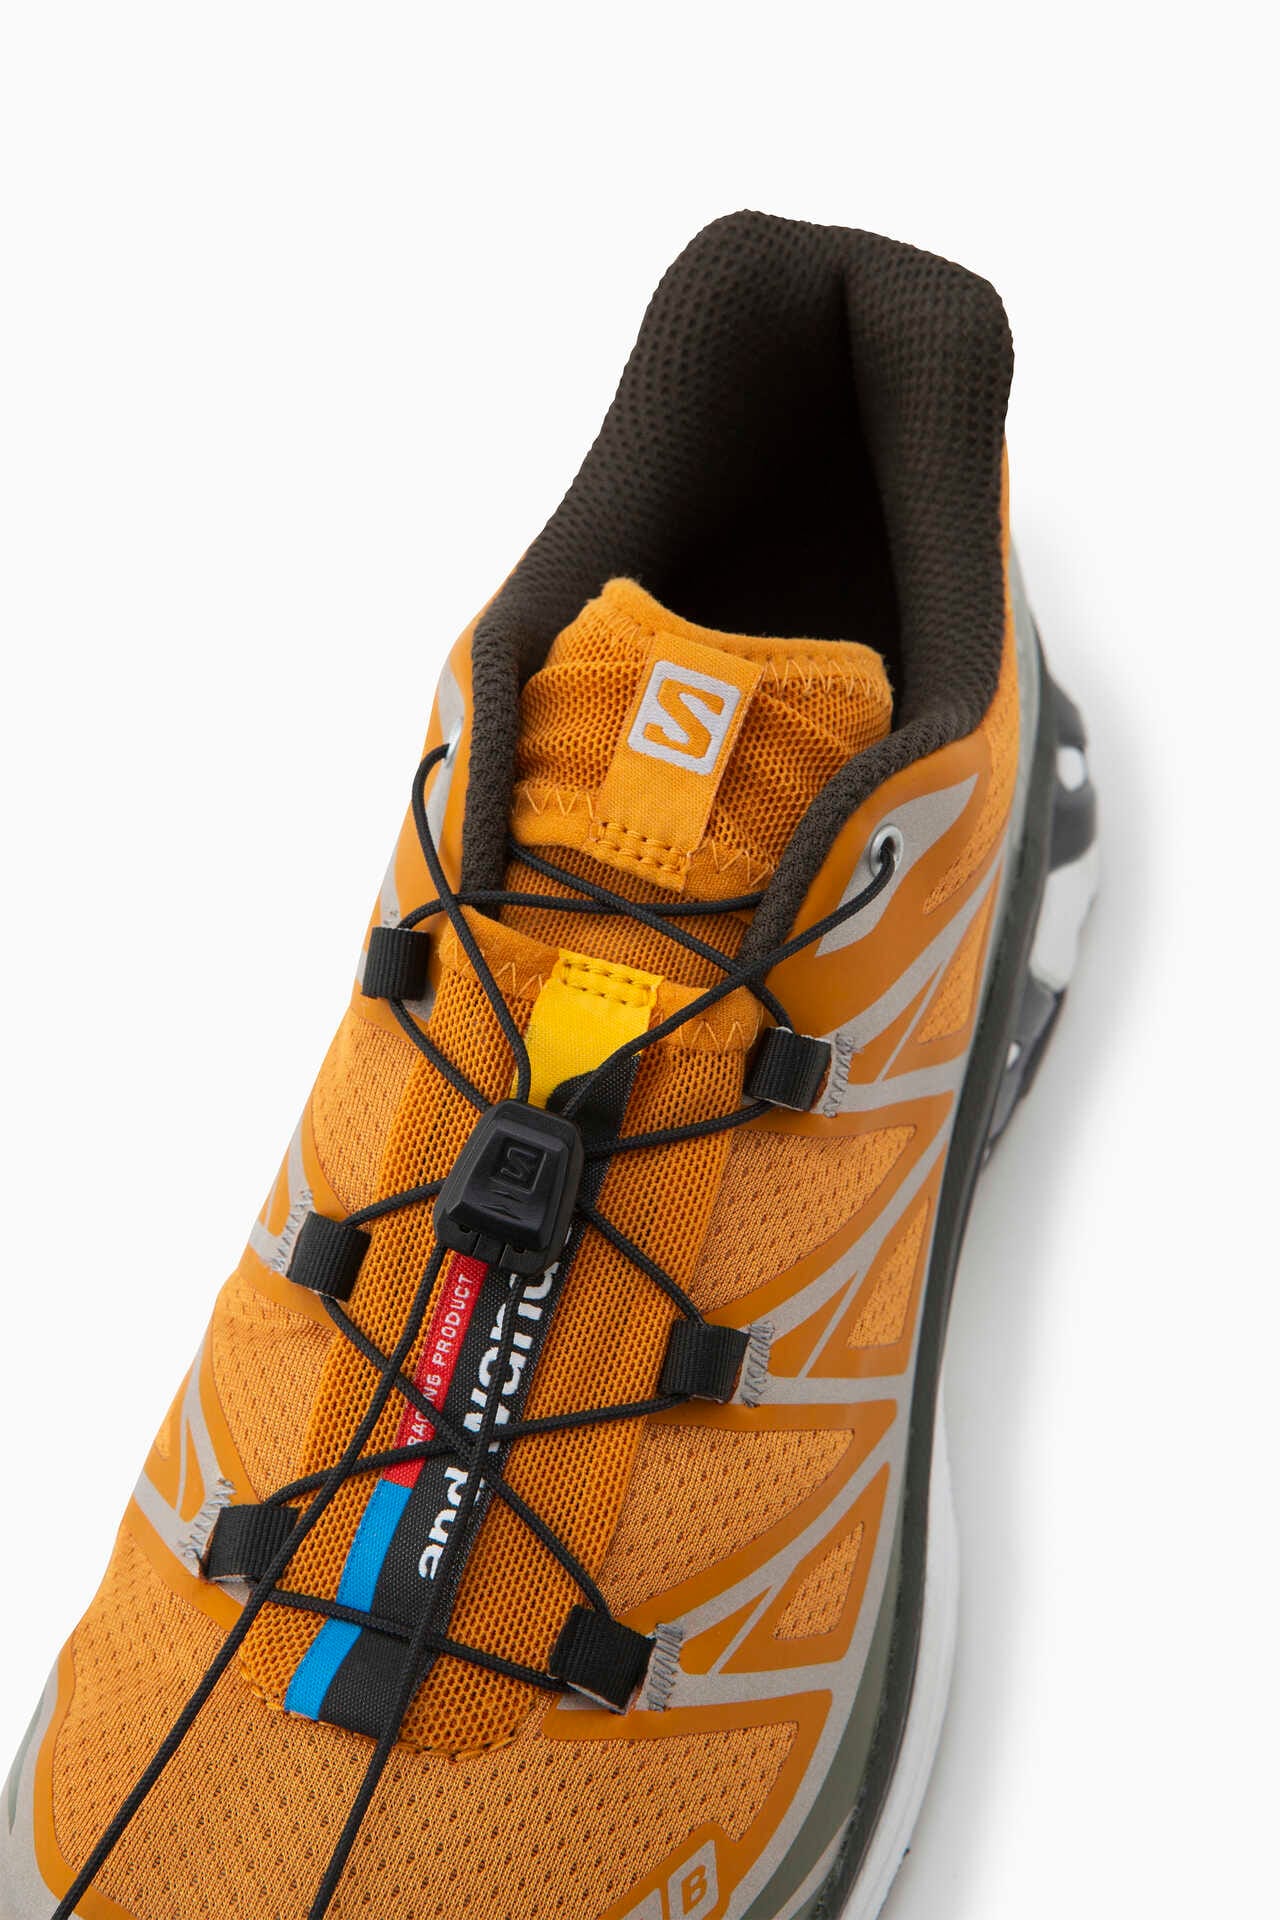 SALOMON XT-6 for and wander